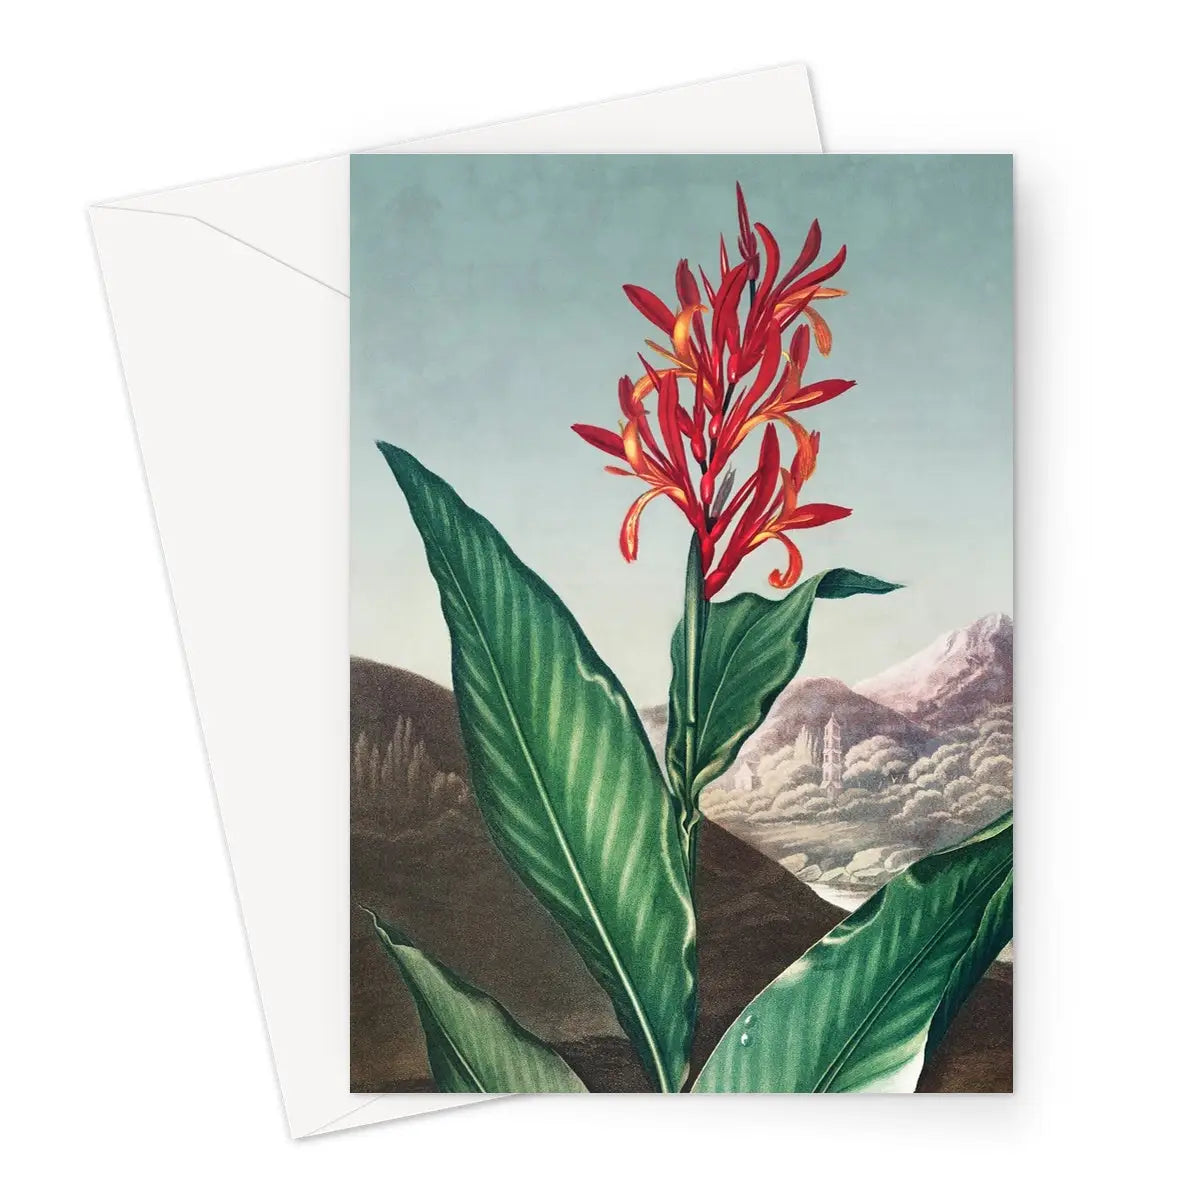 Indian Reed - Robert John Thornton Canna Indica Greeting Card - A5 Portrait / 1 Card - Greeting & Note Cards